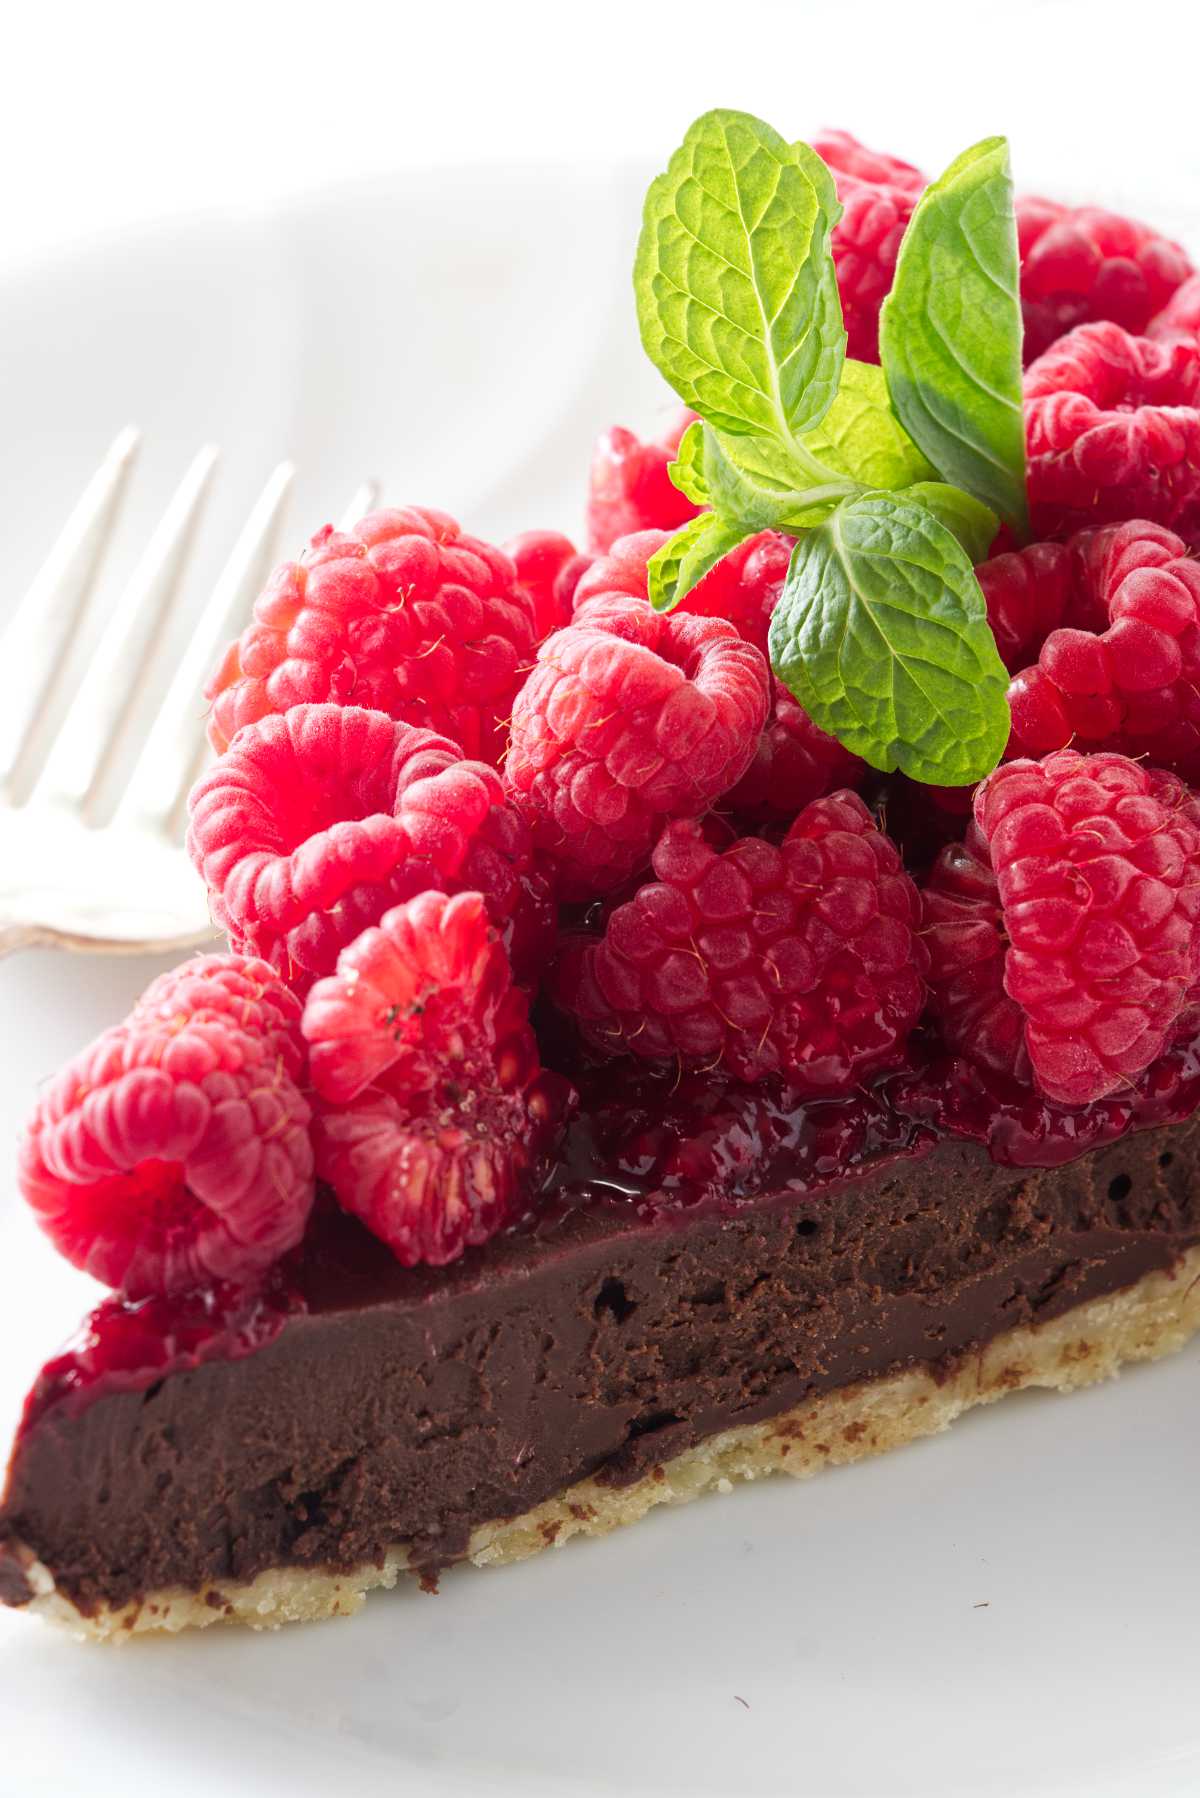 A slice of a chocolate tart topped with raspberries and raspberry sauce.